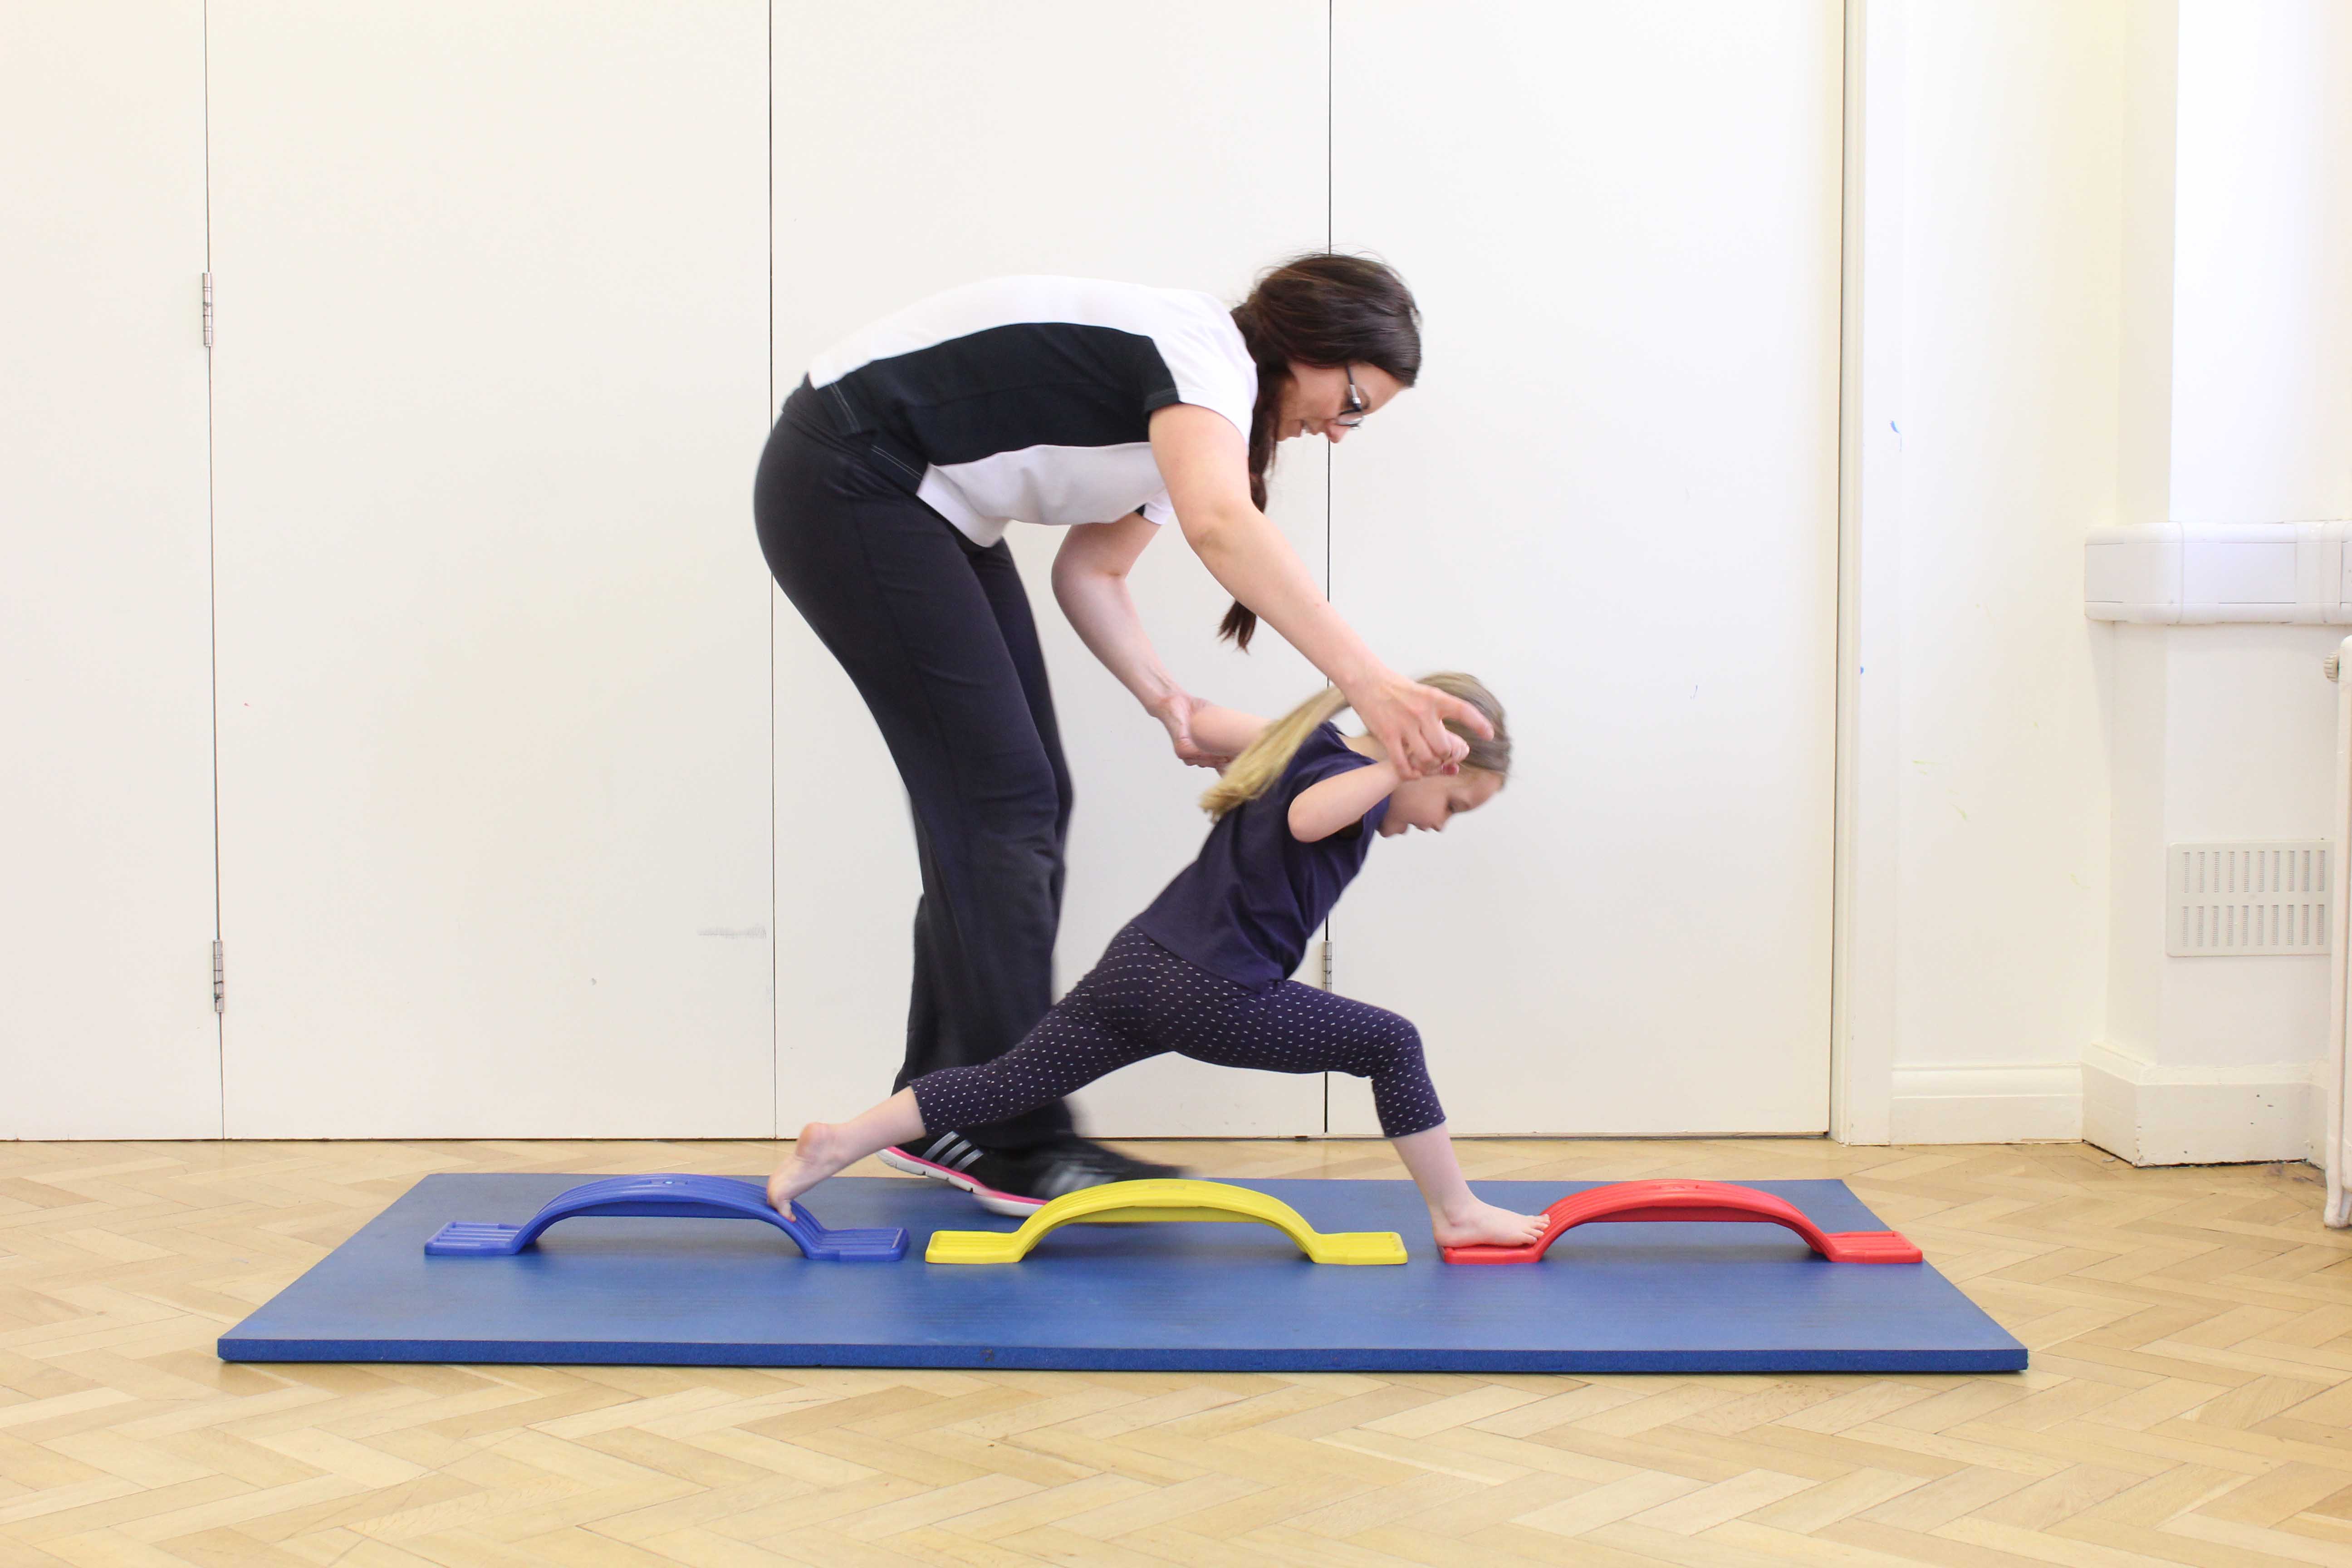 Functional rehabilitation exercises through play supervised by a specilaist paediatric physiotherapist